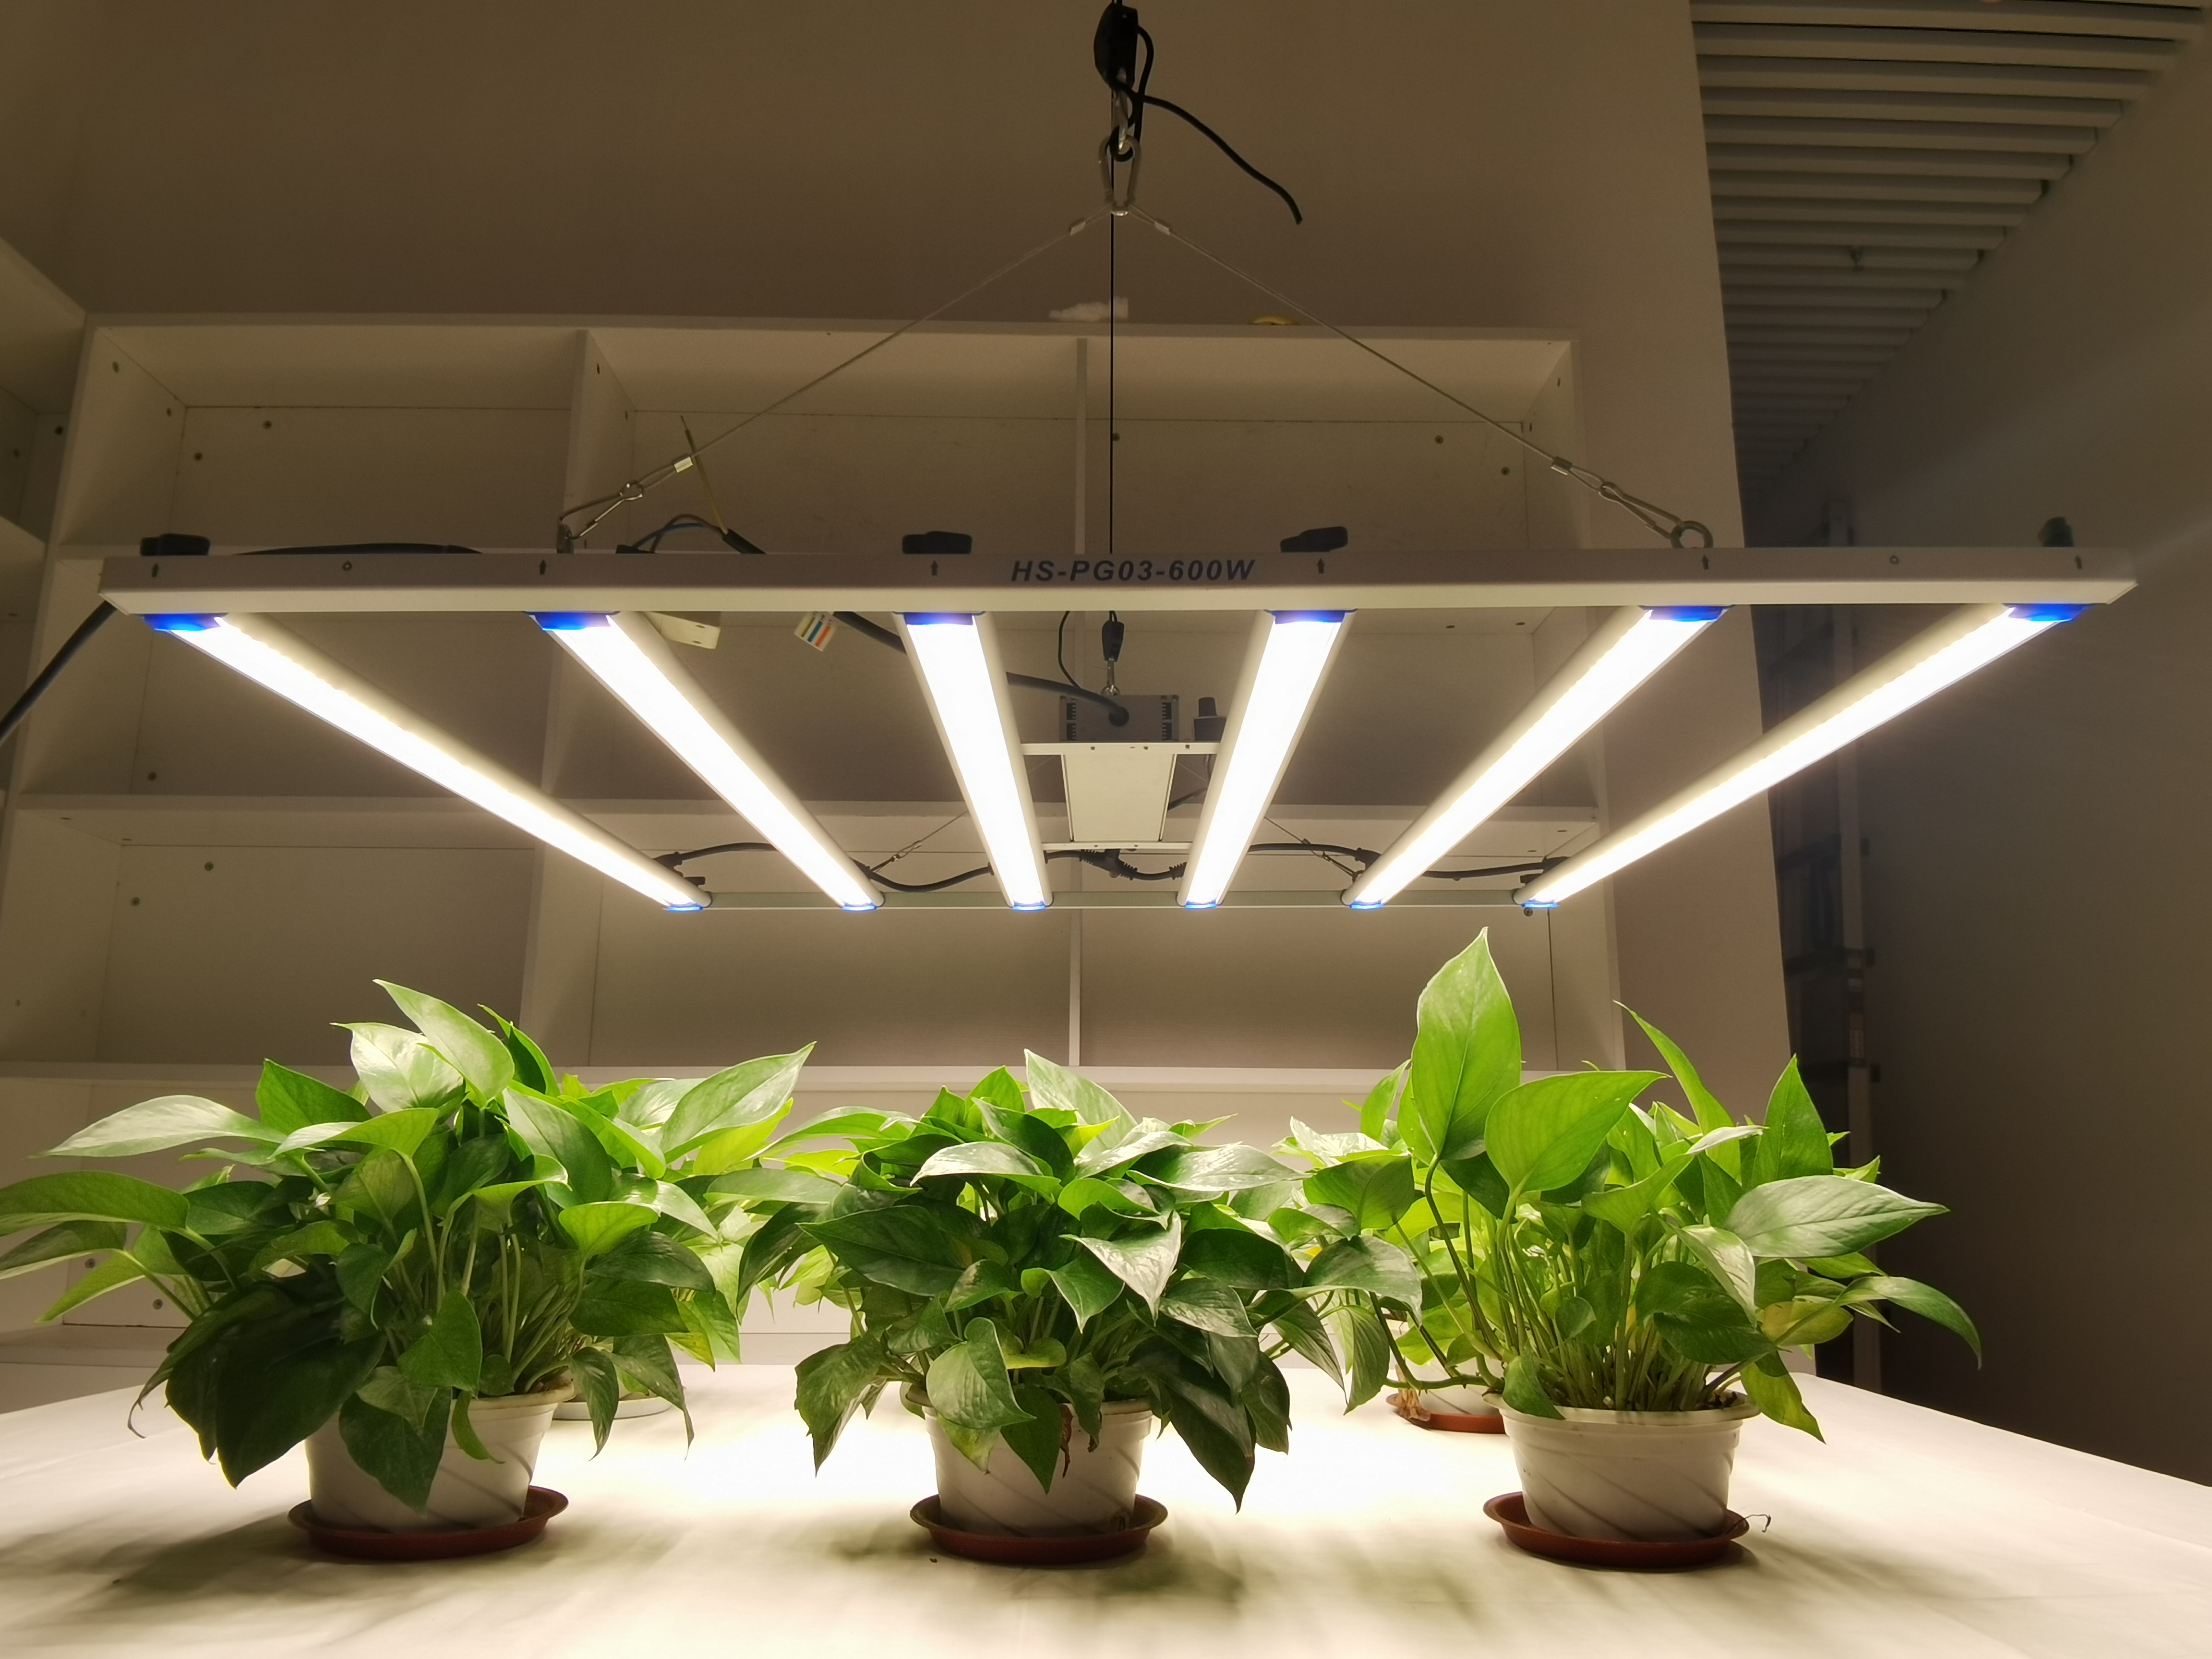 The role of light on plant growth, how grow lights affect plant growth？